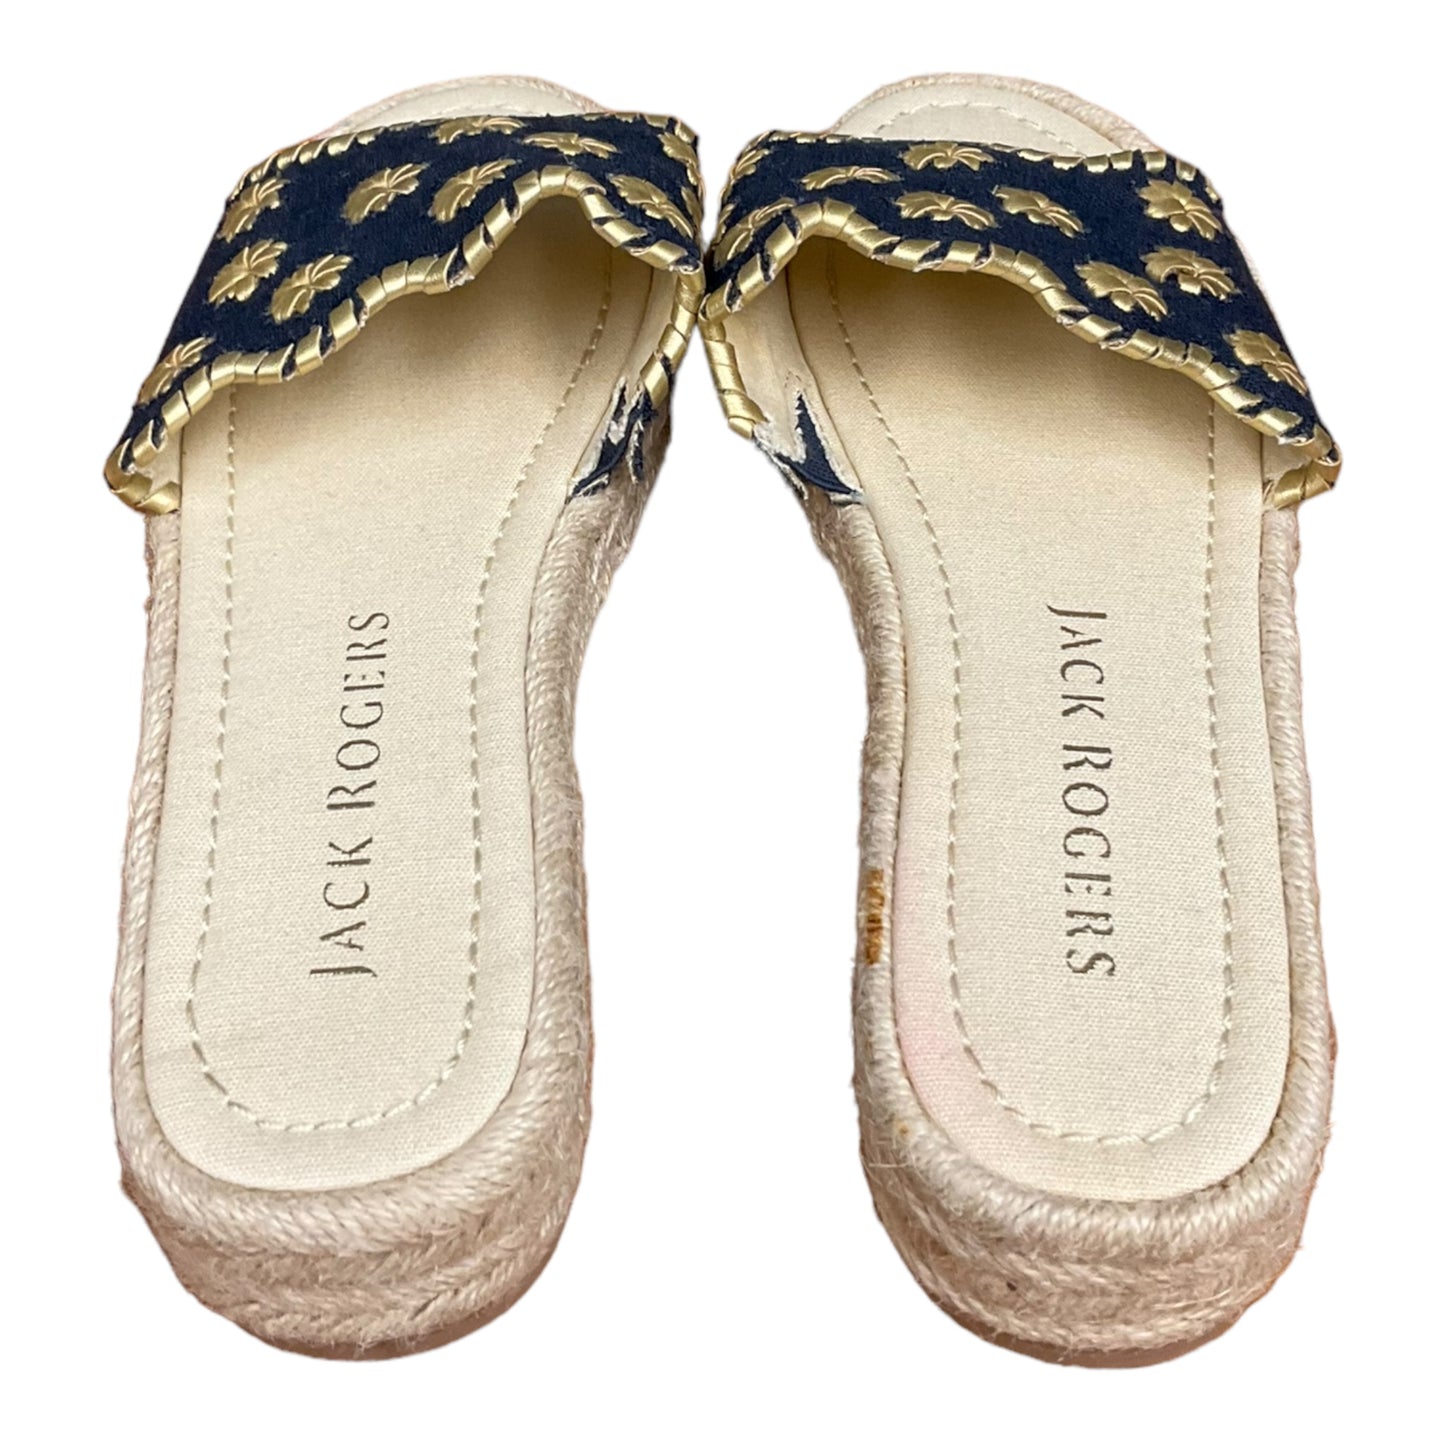 Shoes Flats Espadrille By Jack Rogers  Size: 8.5